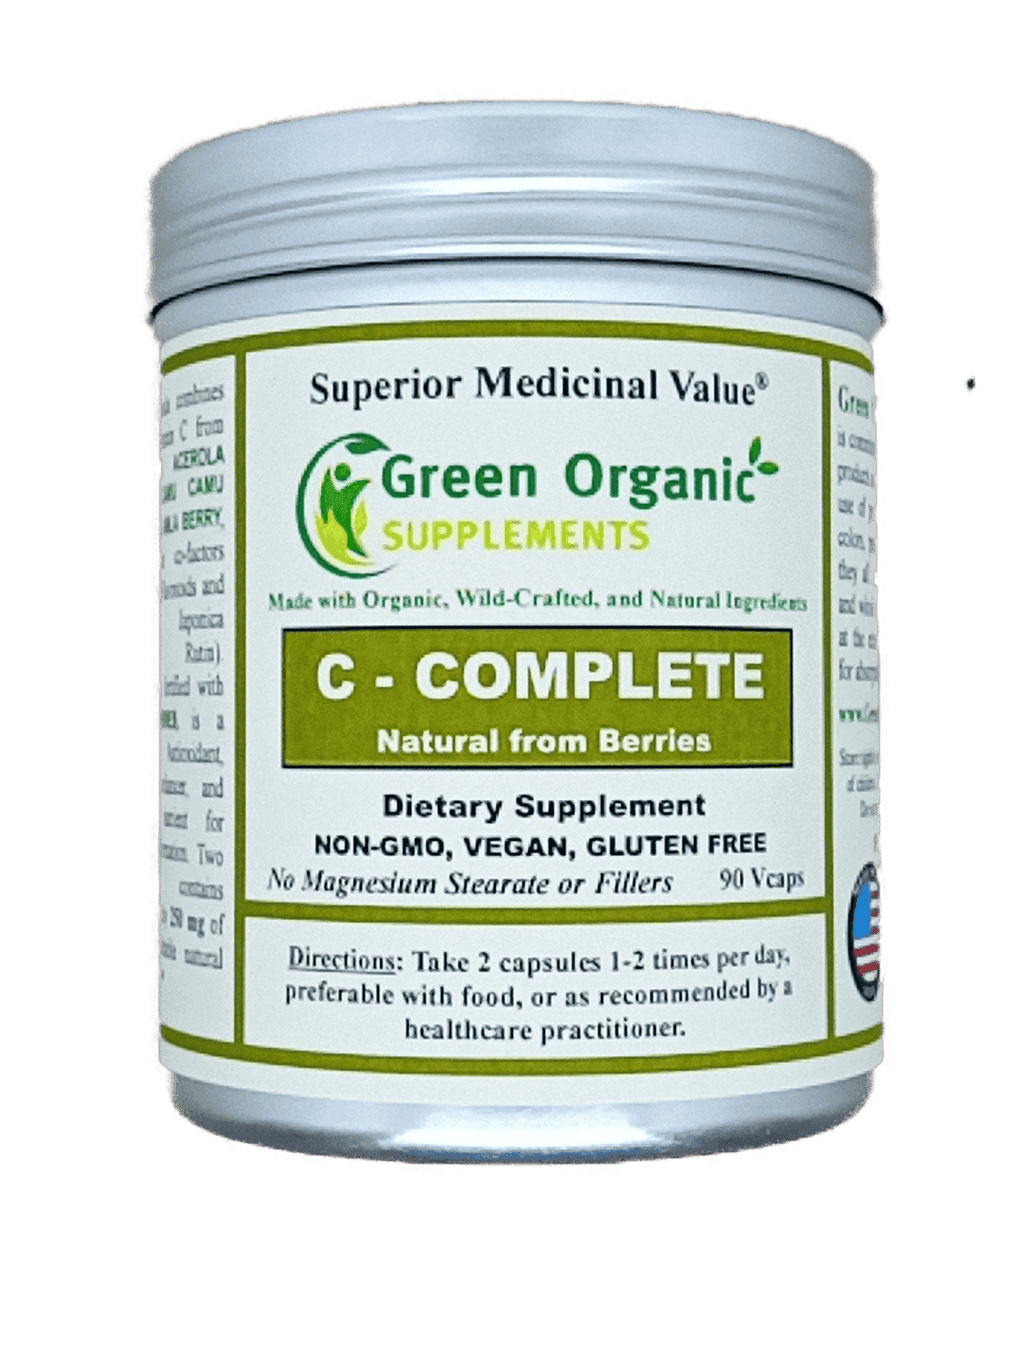 Vitamin C - Complete, Natural from Berries